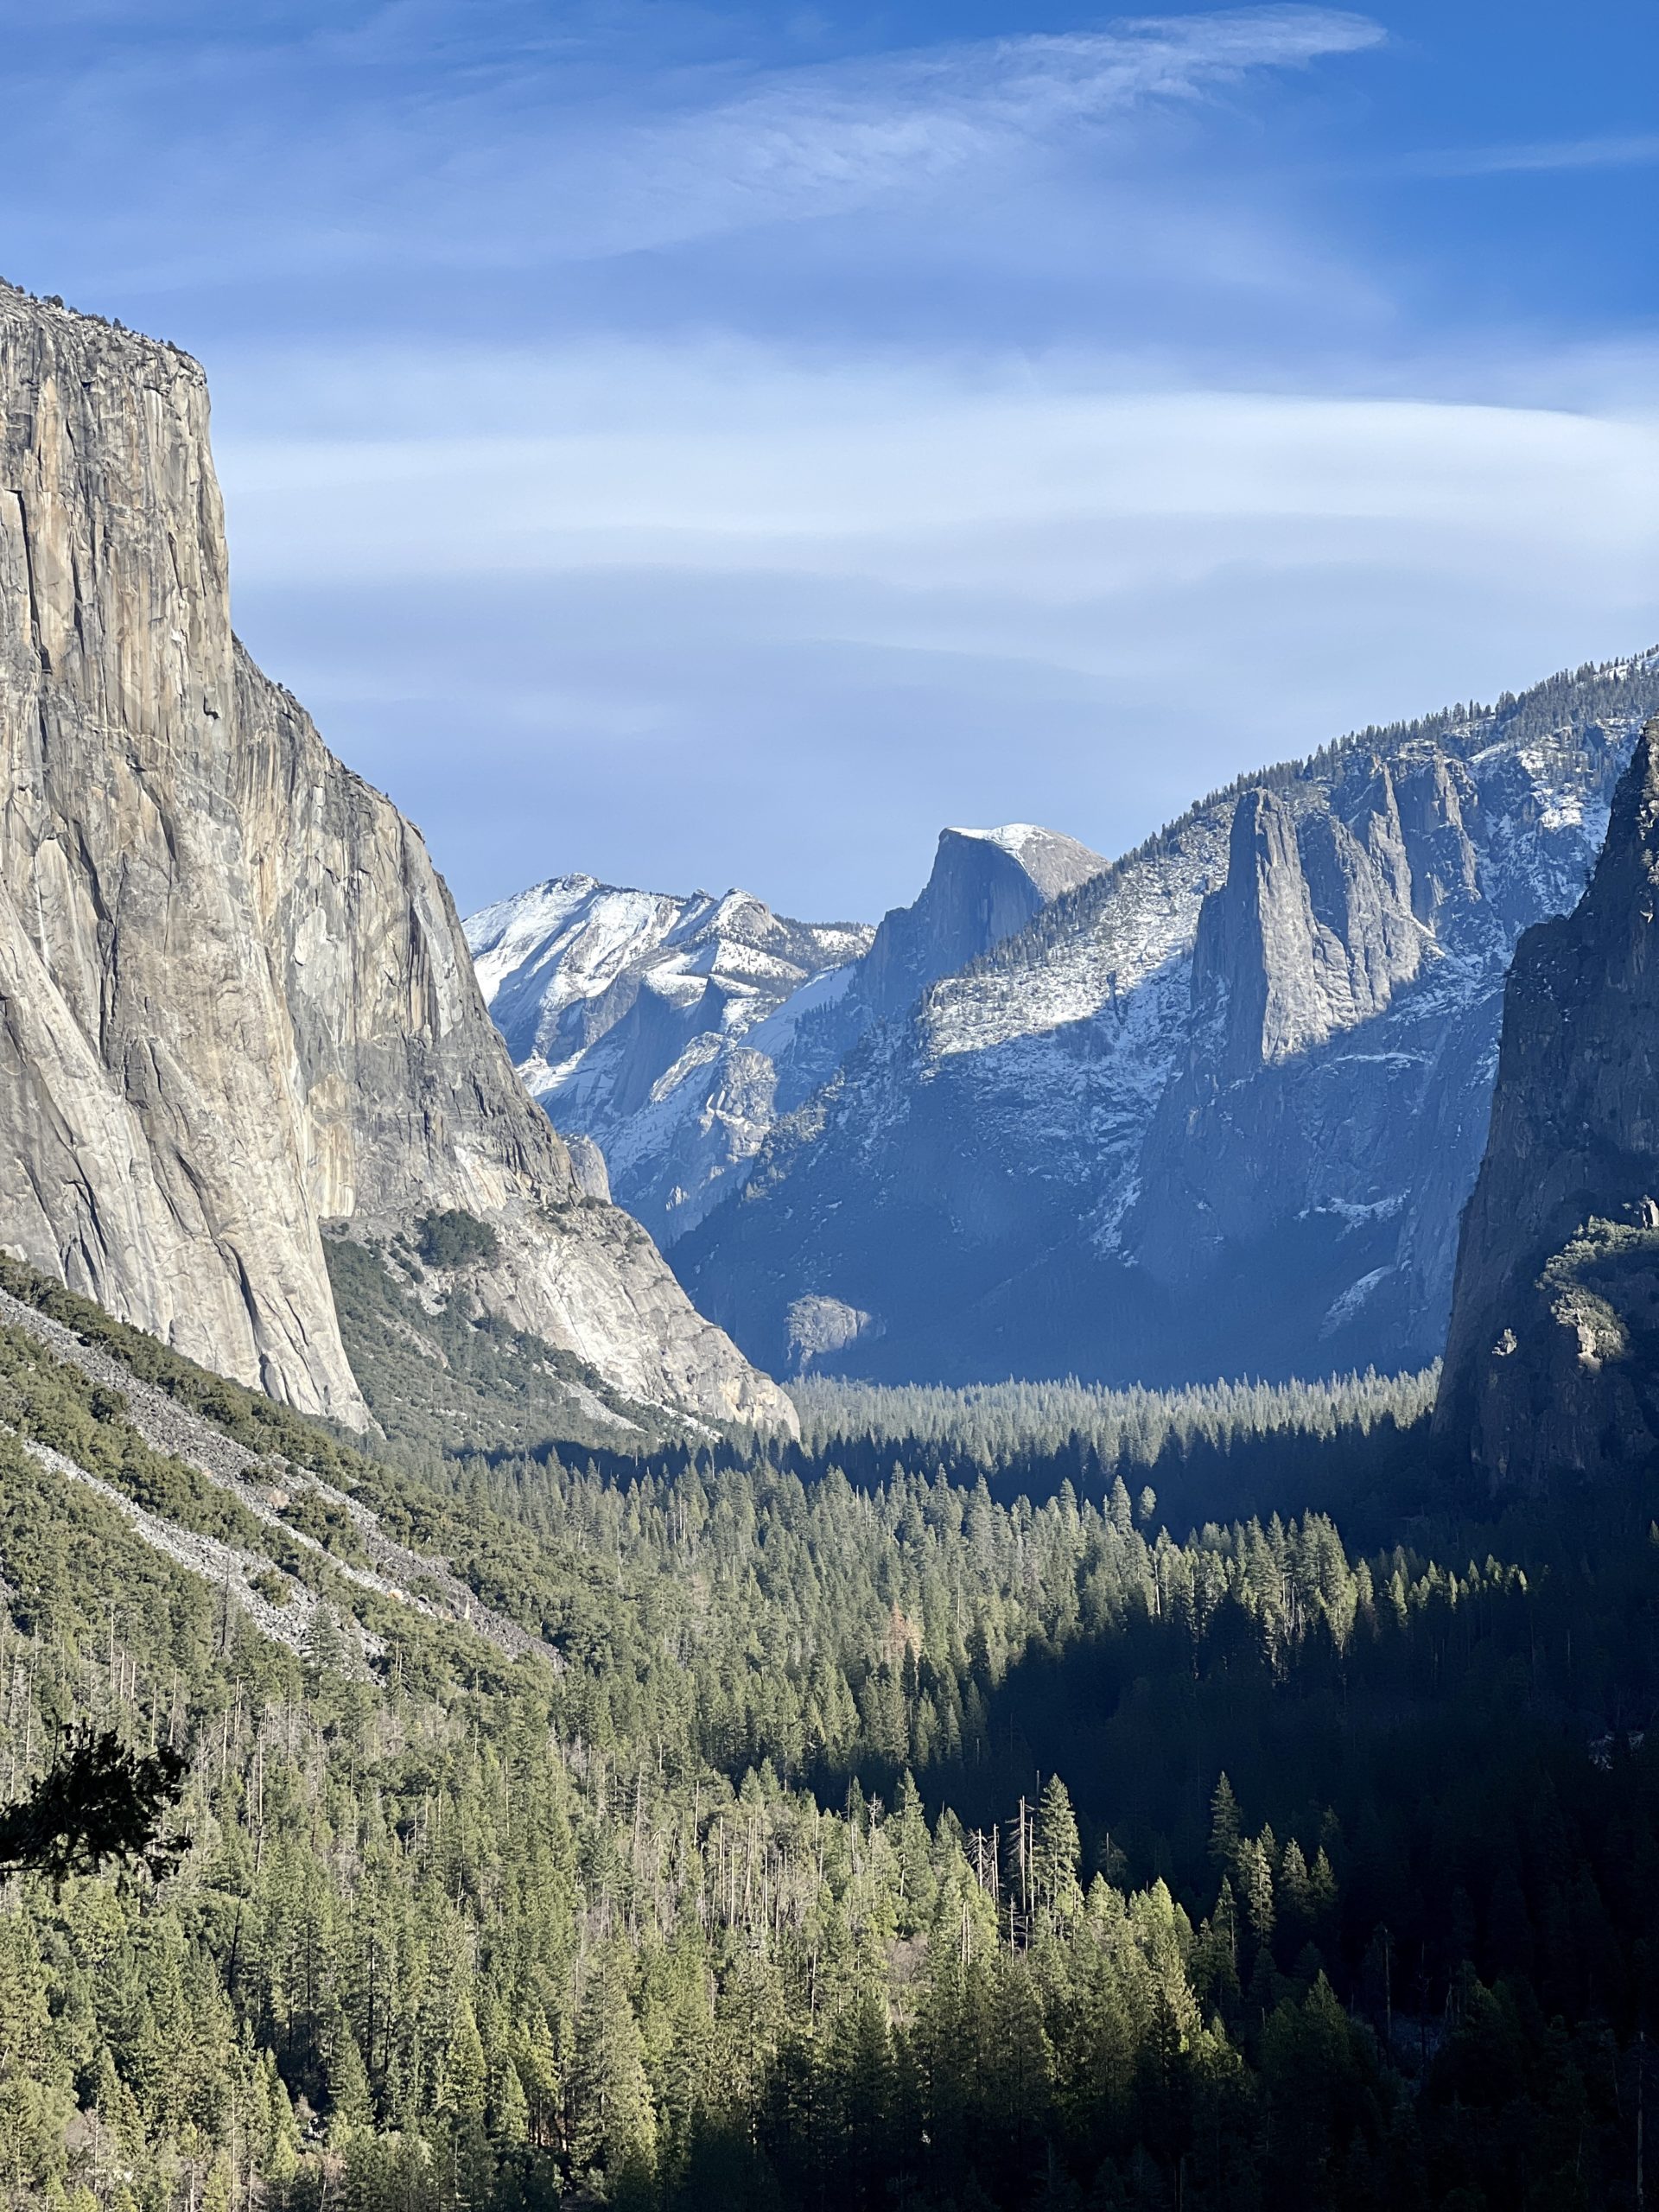 A Complete Travel Guide to Yosemite National Park